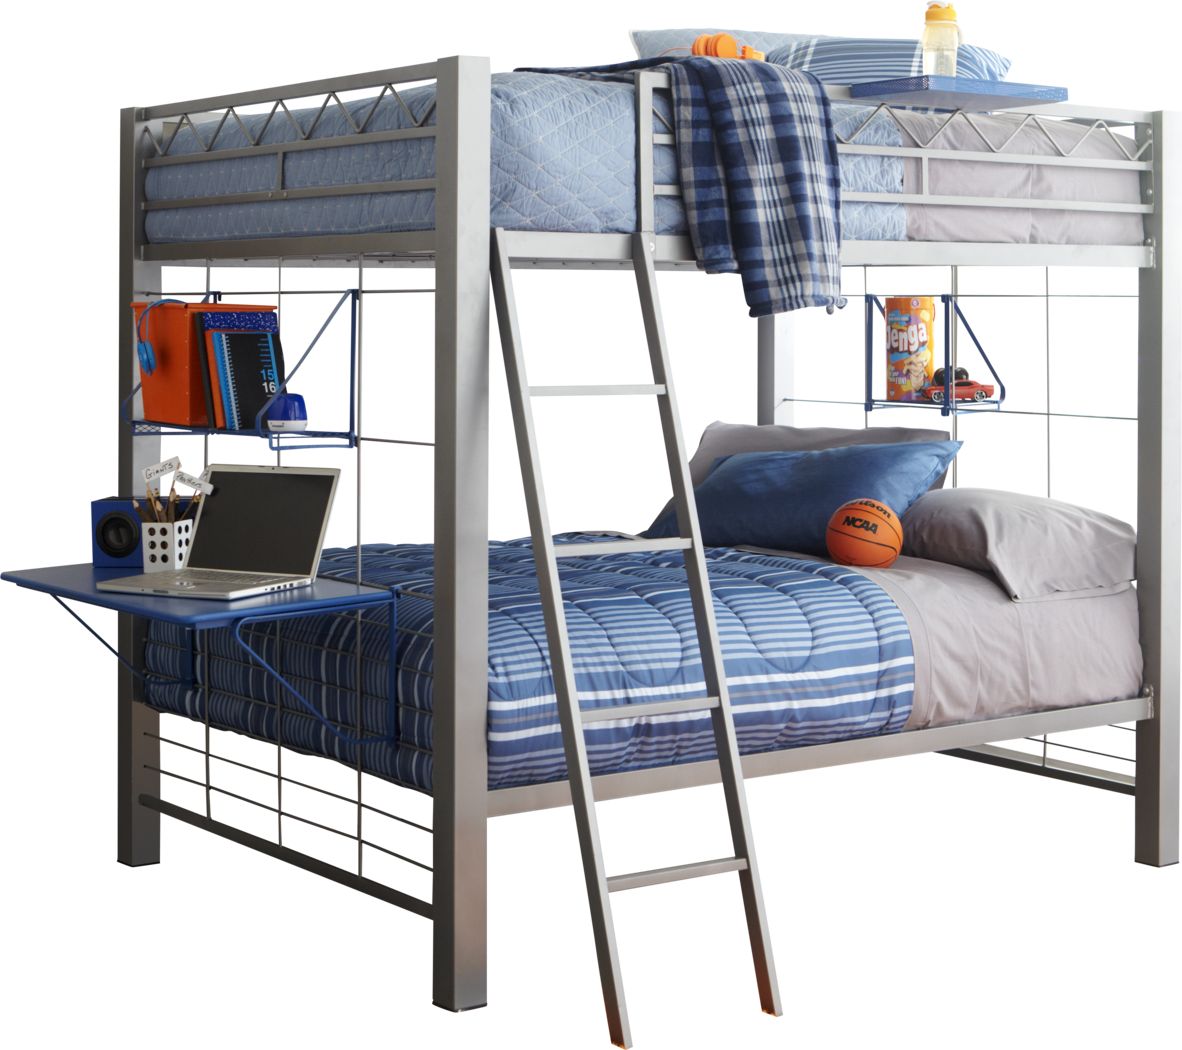 Rooms To Go Triple Bunk Beds New Daily, Bunk Beds For Kids Rooms To Go